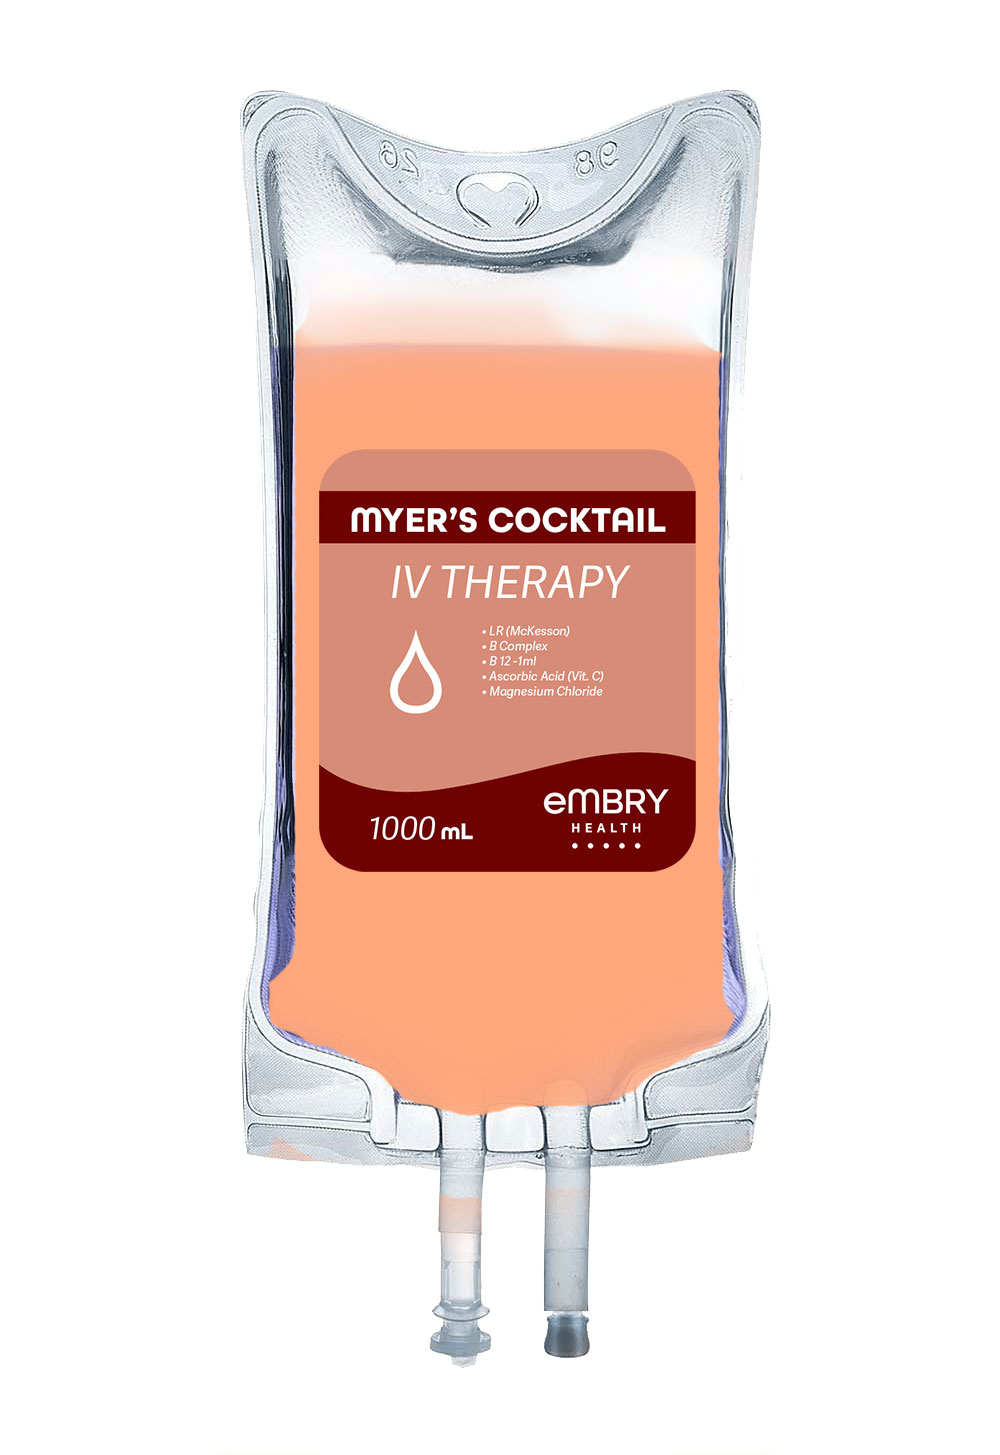 A combination of IV fluids, vitamins, electrolytes, and antioxidants that are effective at treating a range of conditions.